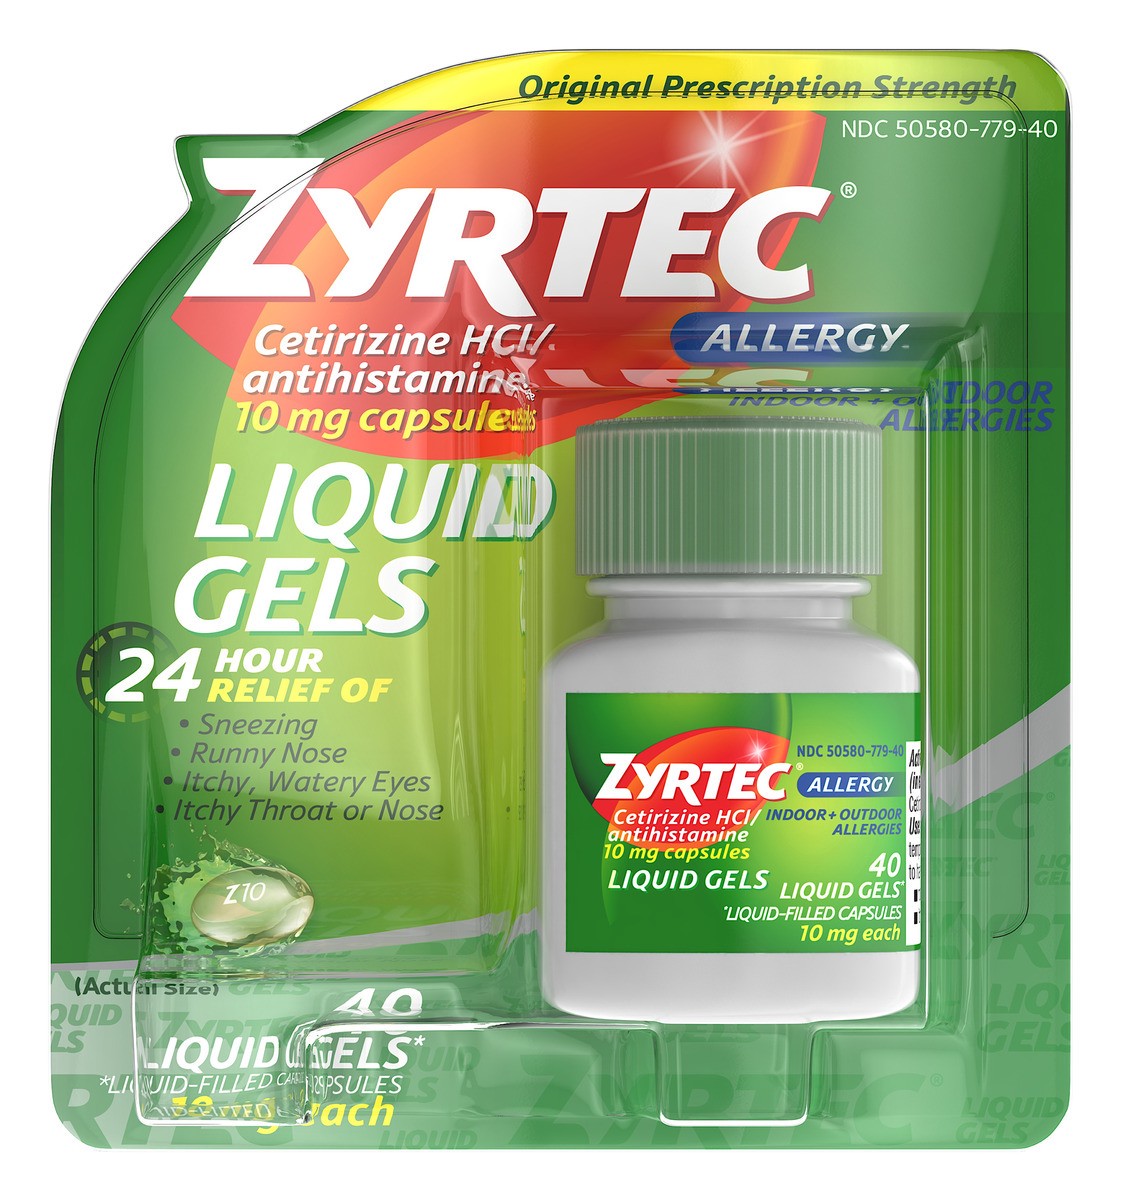 slide 1 of 7, Zyrtec 24 Hour Allergy Relief Liquid Gels, Antihistamine Capsules with Cetirizine Hydrochloride Allergy Medicine for All-Day Relief from Runny Nose, Sneezing, Itchy Eyes & More, 40 ct, 40 ct